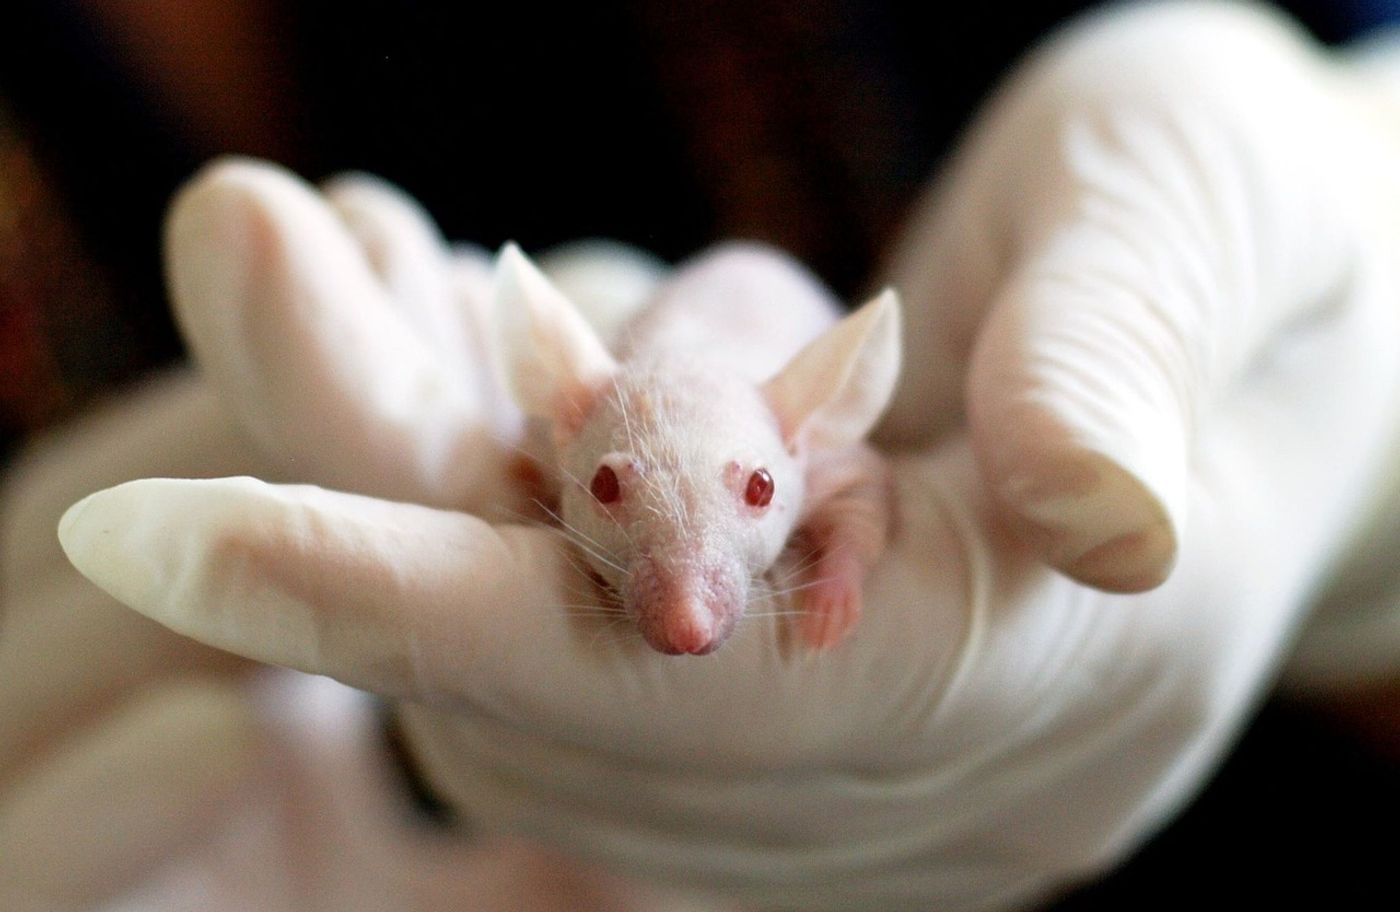 Lab mice were used in the experiment to produce a 3D-printed 'ovary.'